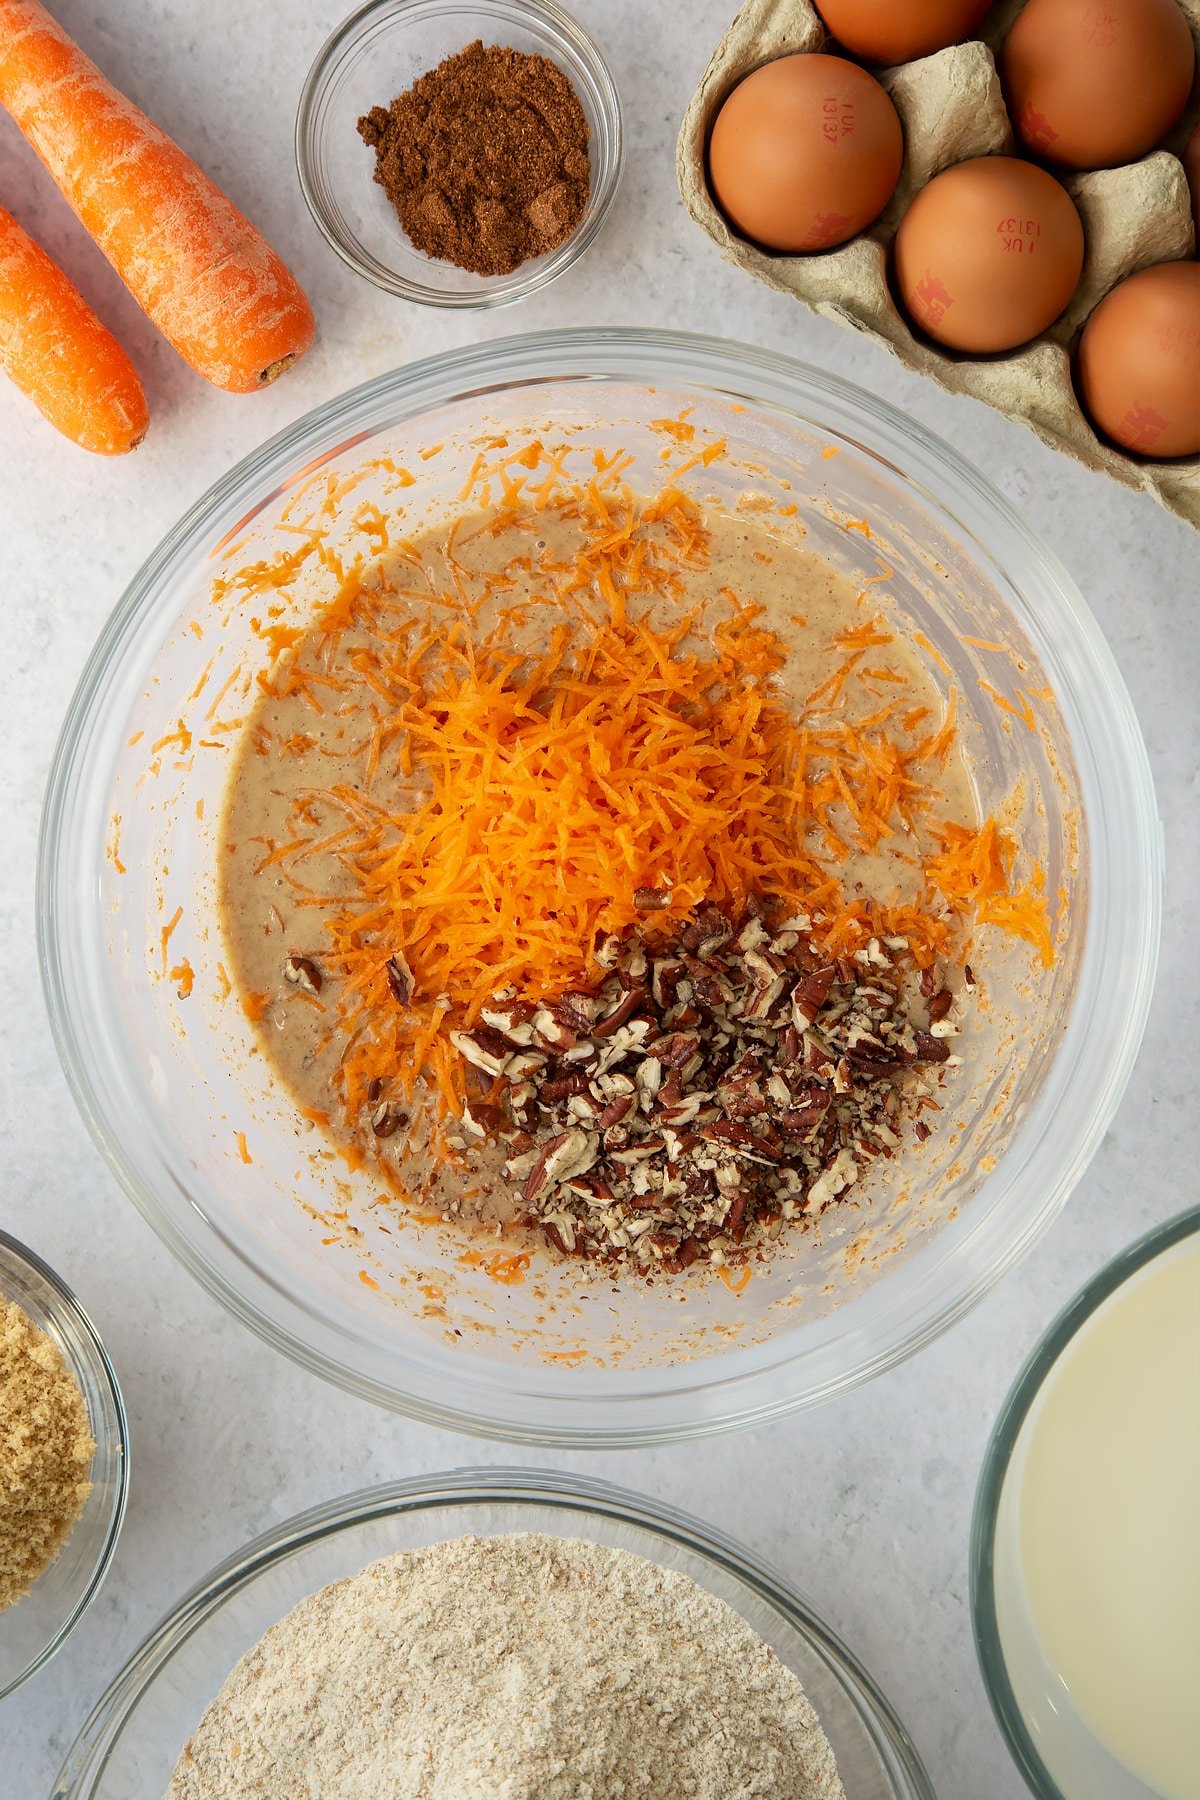 brown sugar, egg and flour mixture in a large clear bowl topped with pecans and grated carrot.